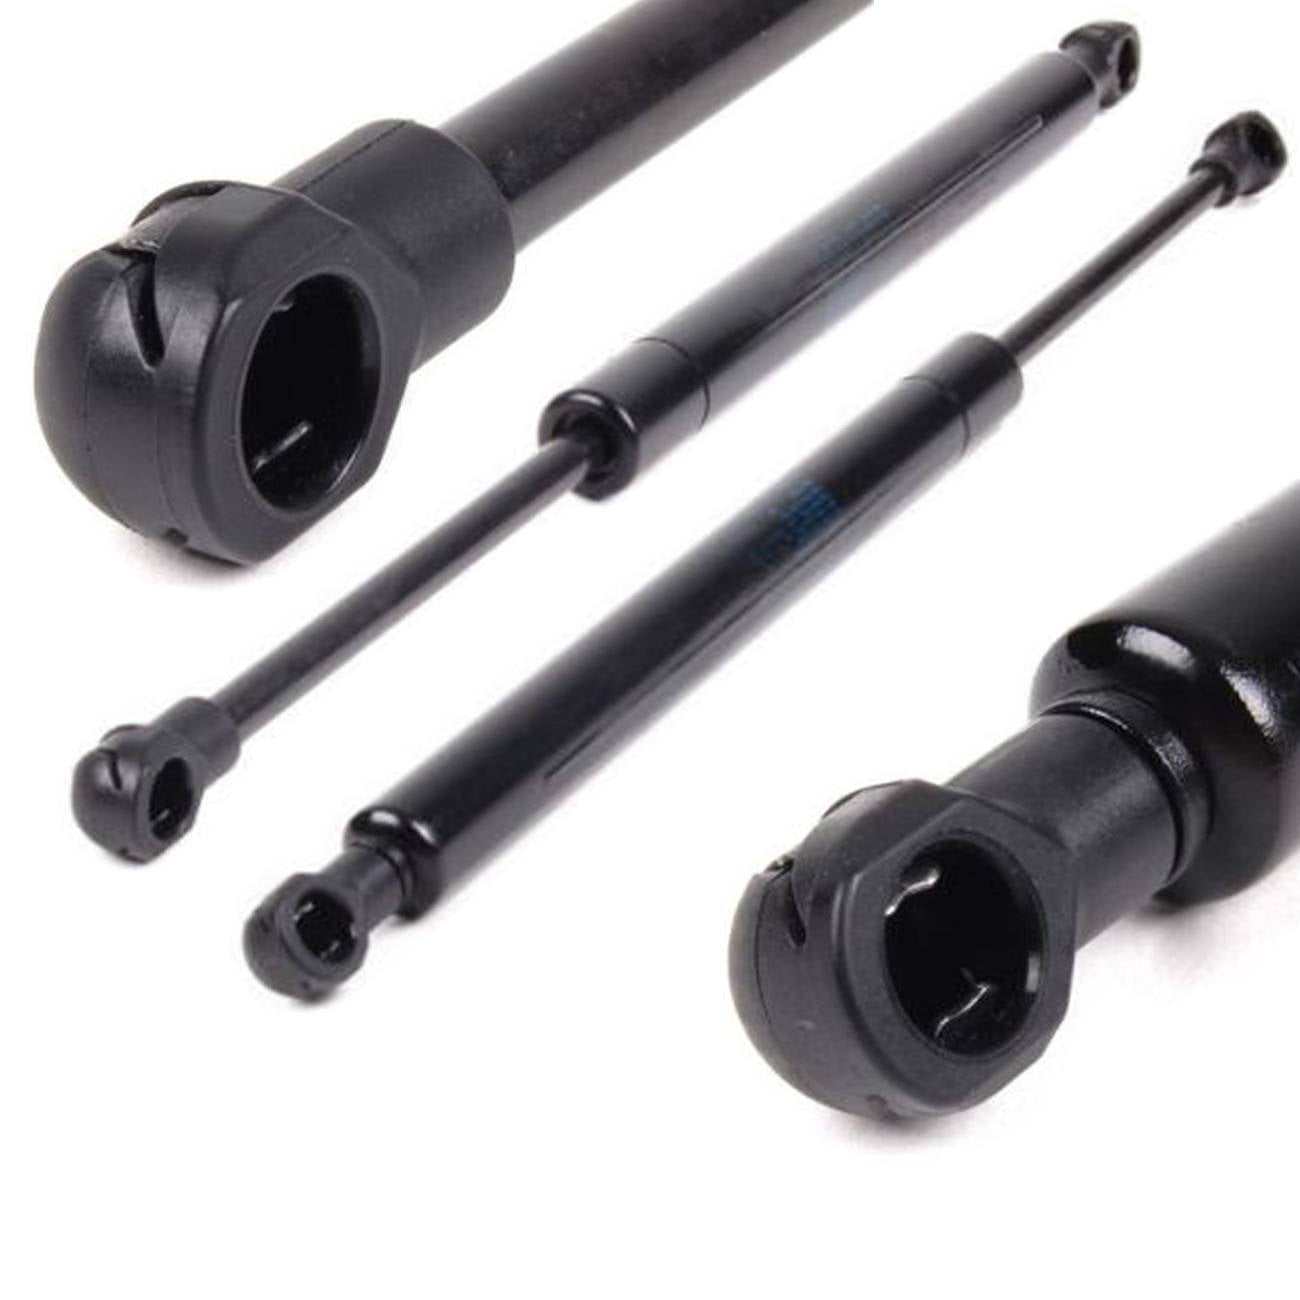 2 FRONT HOOD LIFT SUPPORTS SHOCKS STRUTS ARMS PROP RODS DAMPER FITS BMW M3 E46